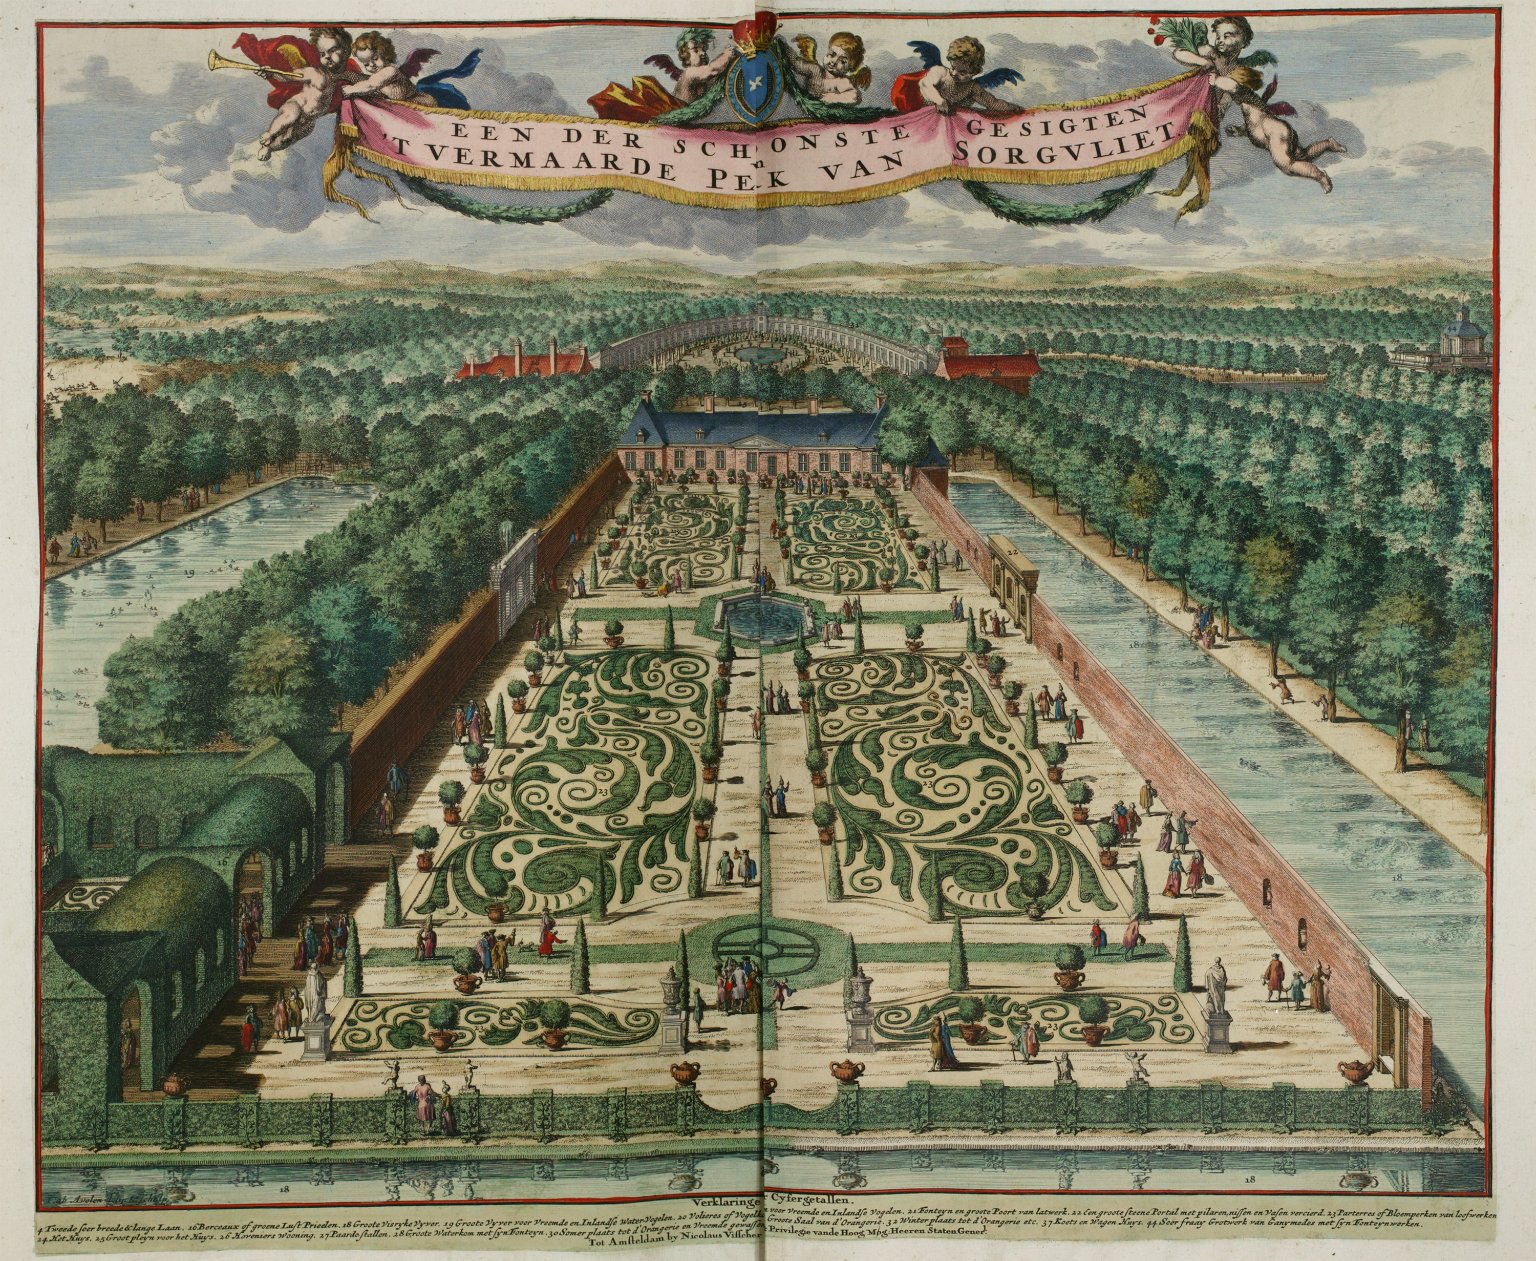 One of the most beautiful views of the parterre of the park of Sorgvliet [Zorgvliet]